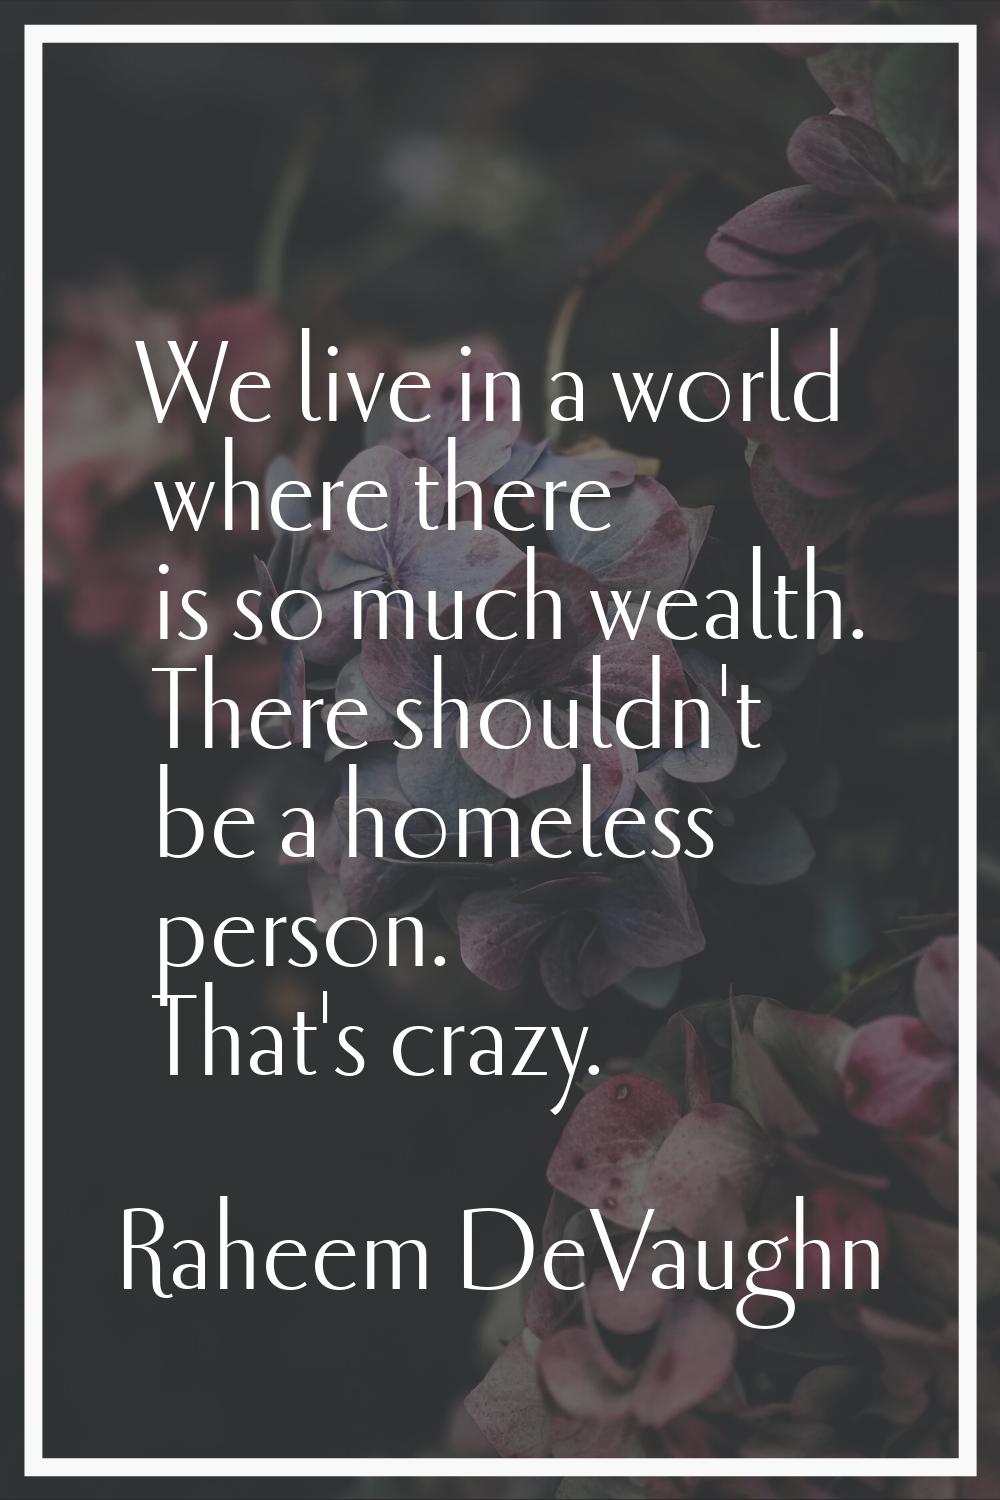 We live in a world where there is so much wealth. There shouldn't be a homeless person. That's craz